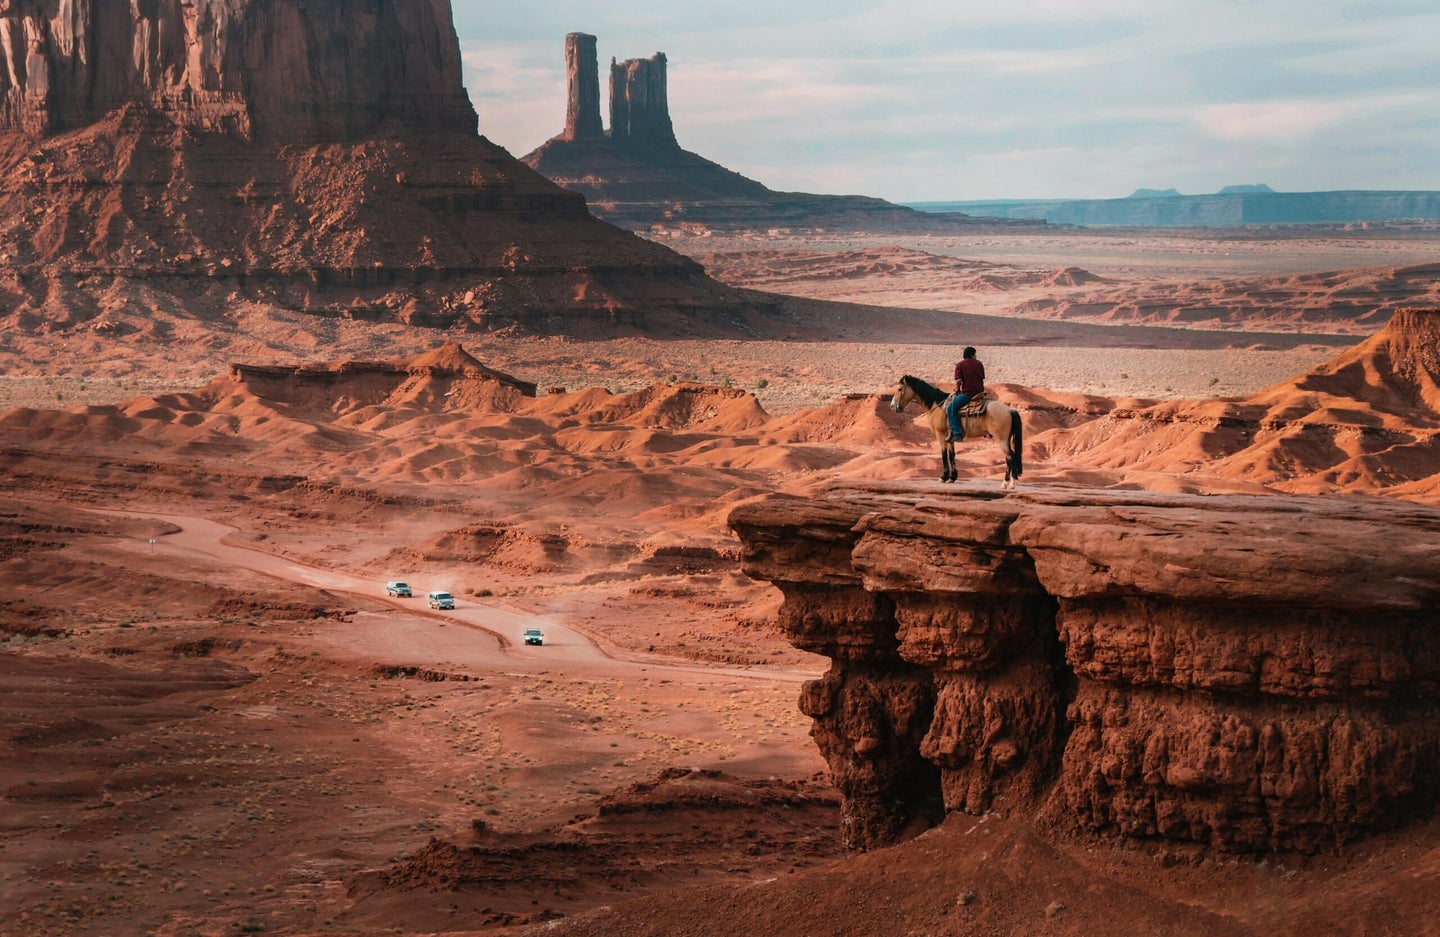 monument valley with person on horse in foreground cars in background